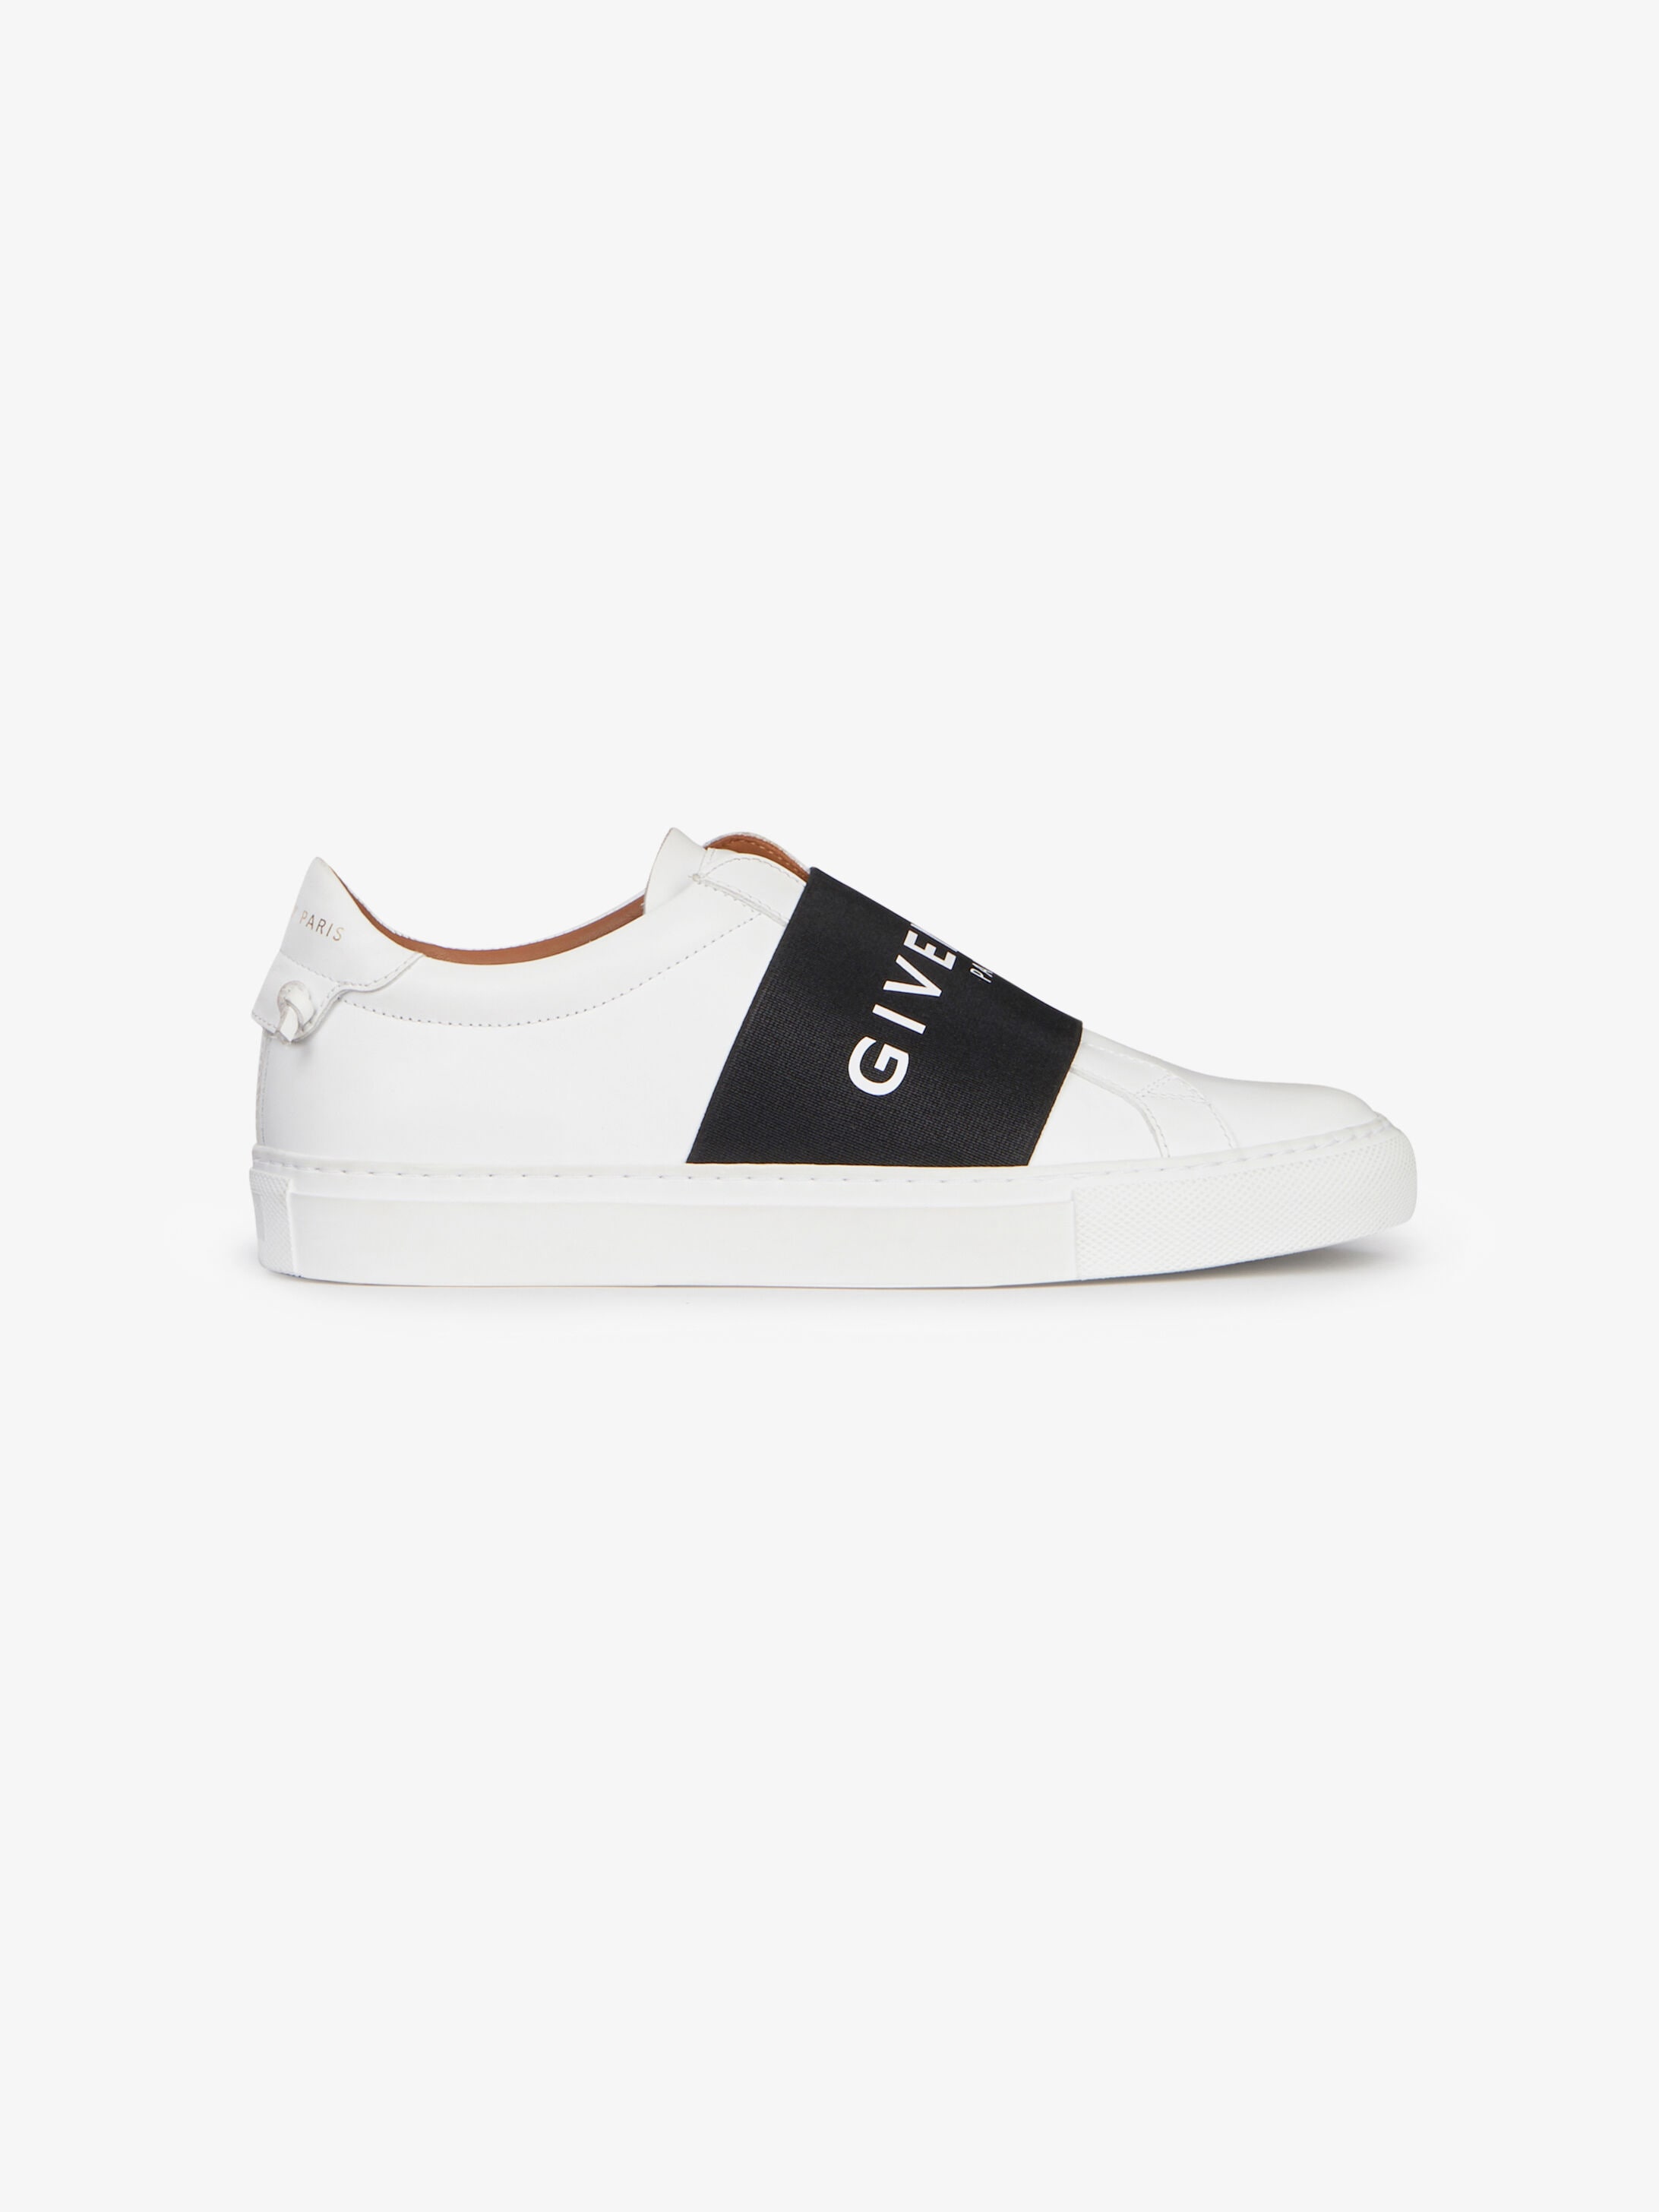 givenchy pink trainers